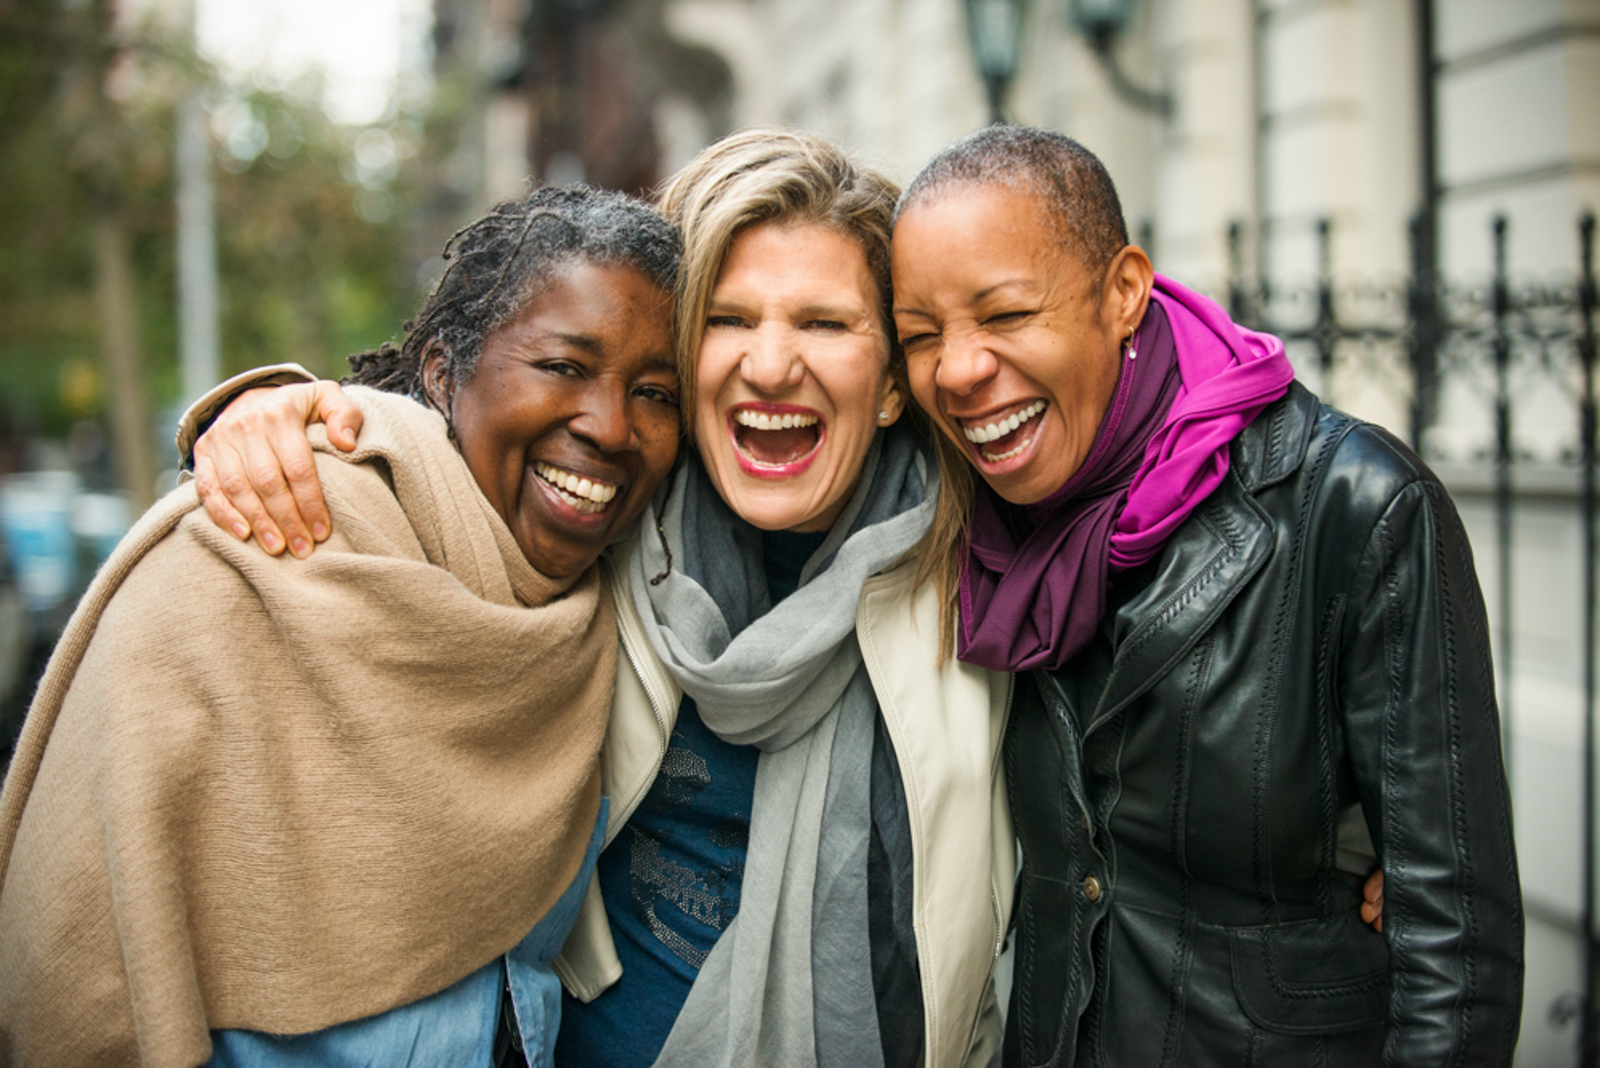 Three women hugging and smiling in a New York City street